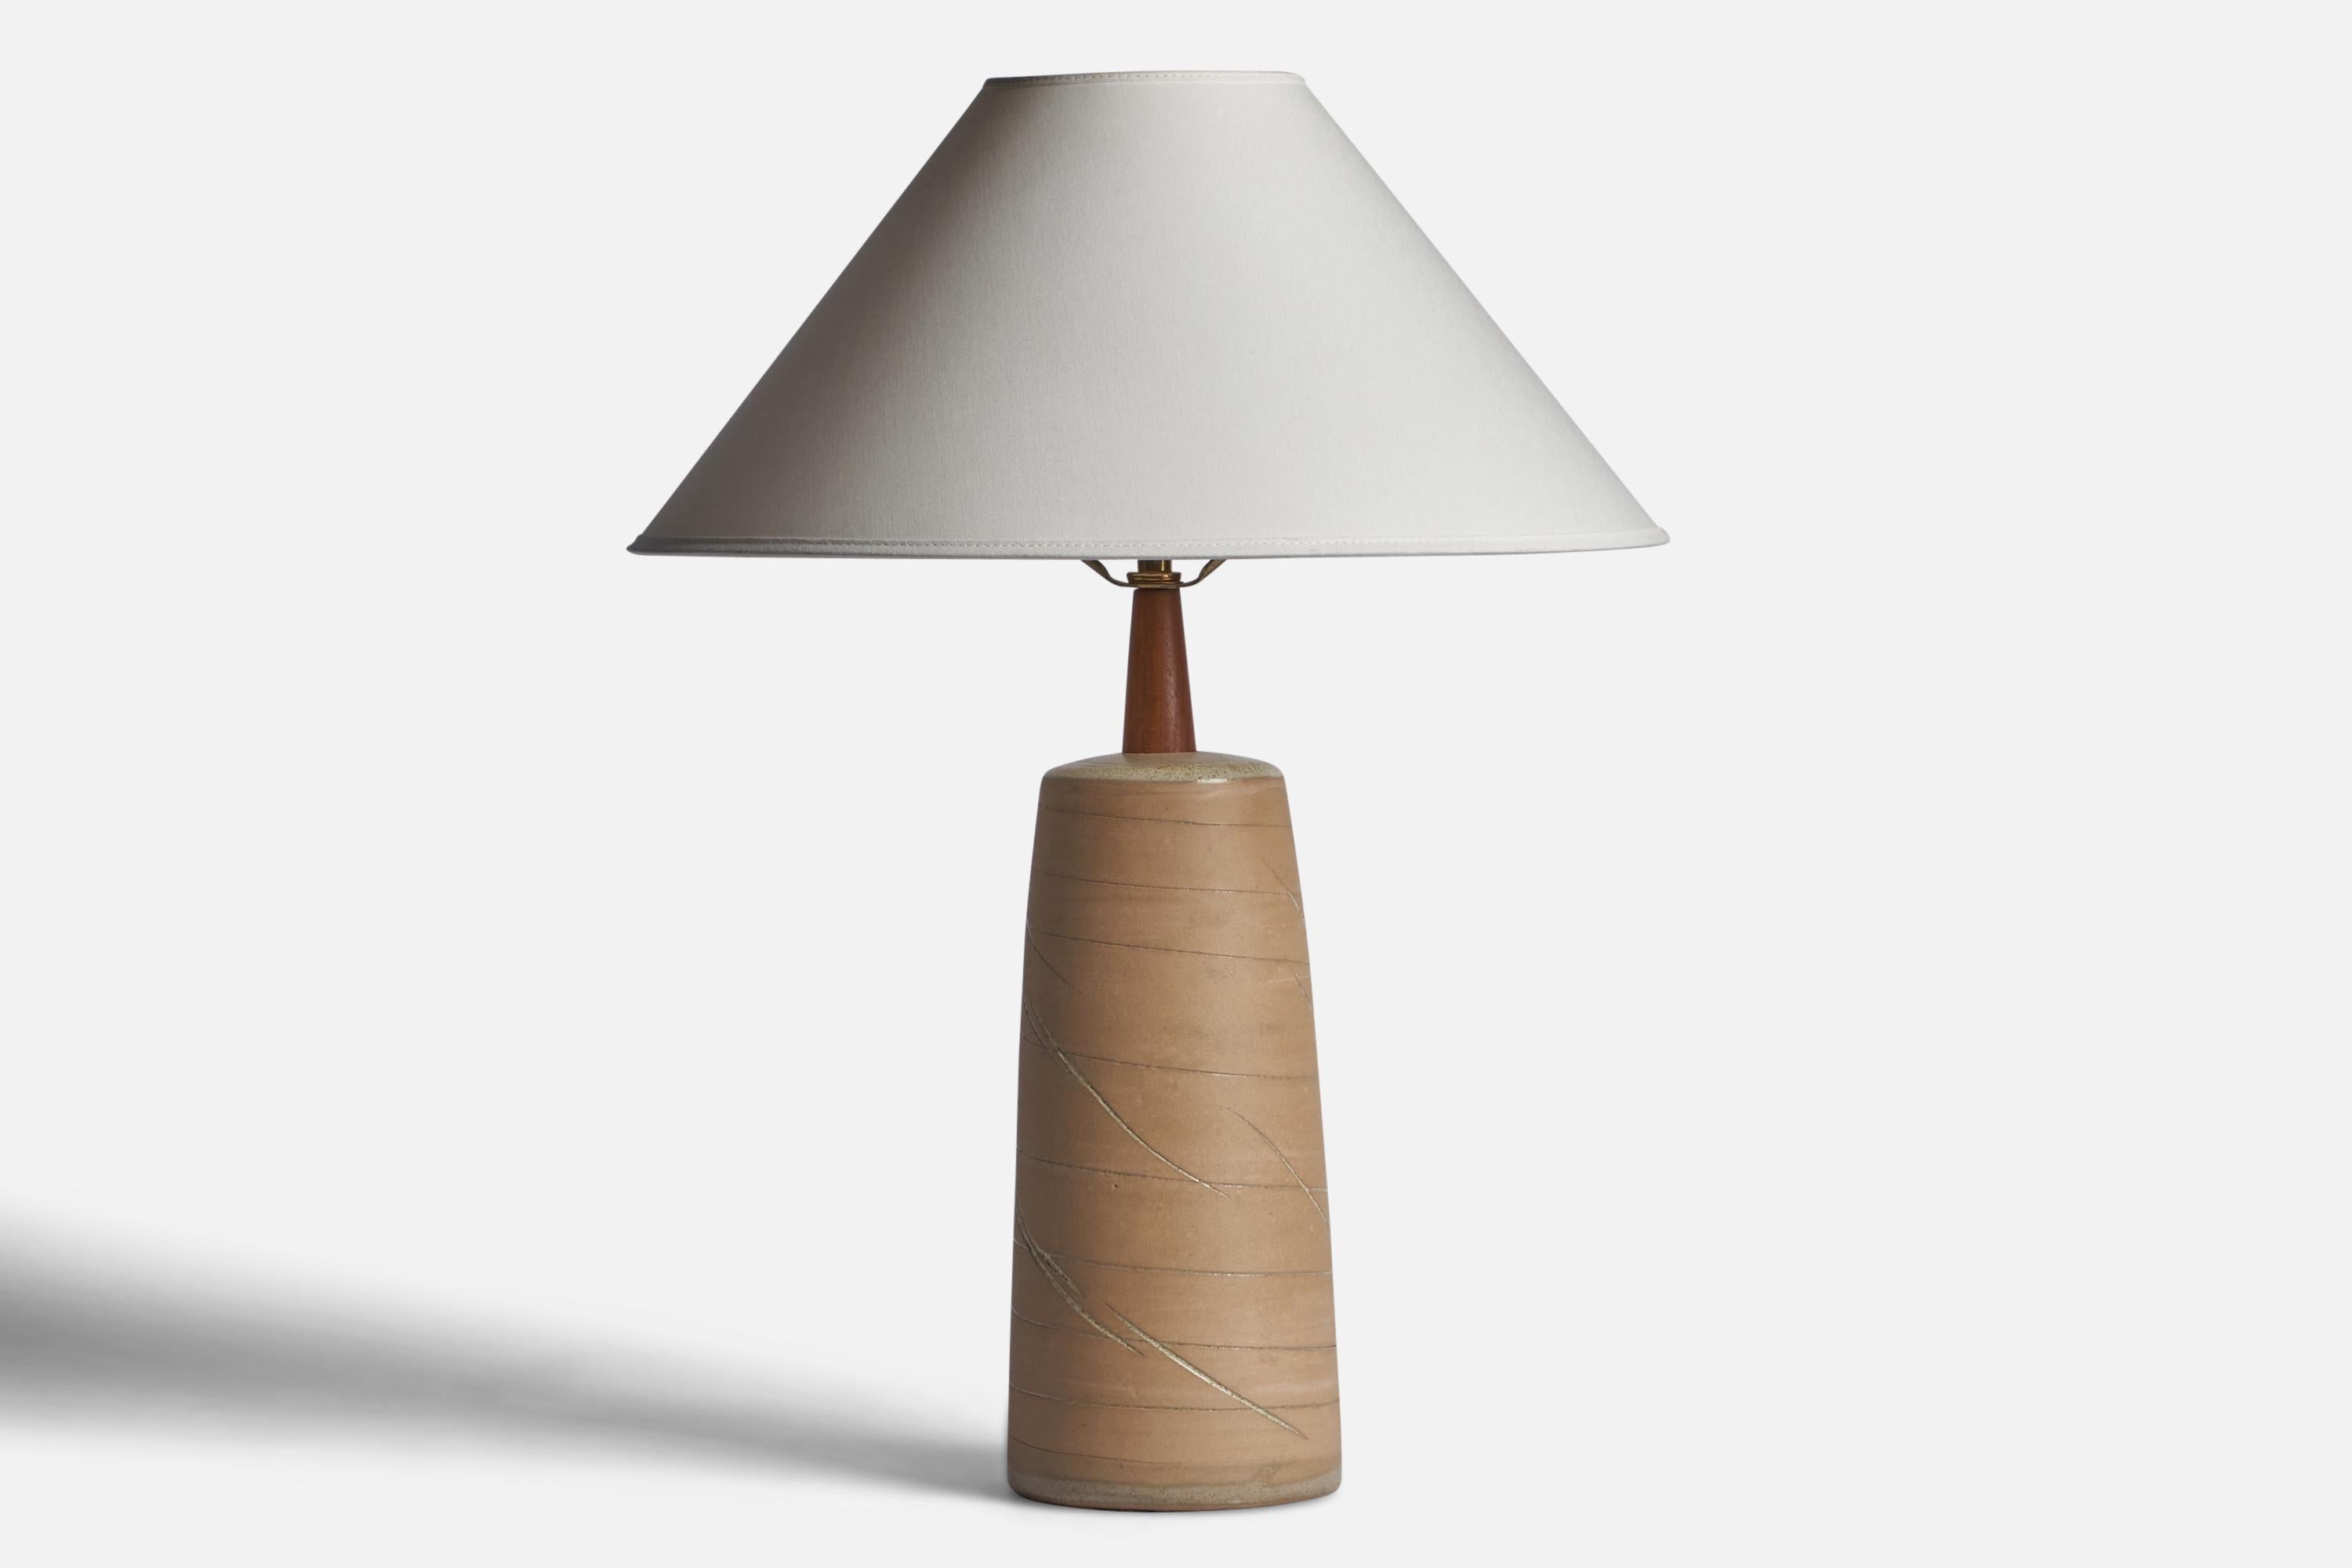 A beige-glazed ceramic and walnut table lamp designed by Jane & Gordon Martz and produced by Marshall Studios, USA, 1960s.

Dimensions of Lamp (inches): 16.95” H x 5.1” Diameter
Dimensions of Shade (inches): 4.5” Top Diameter x 16” Bottom Diameter x